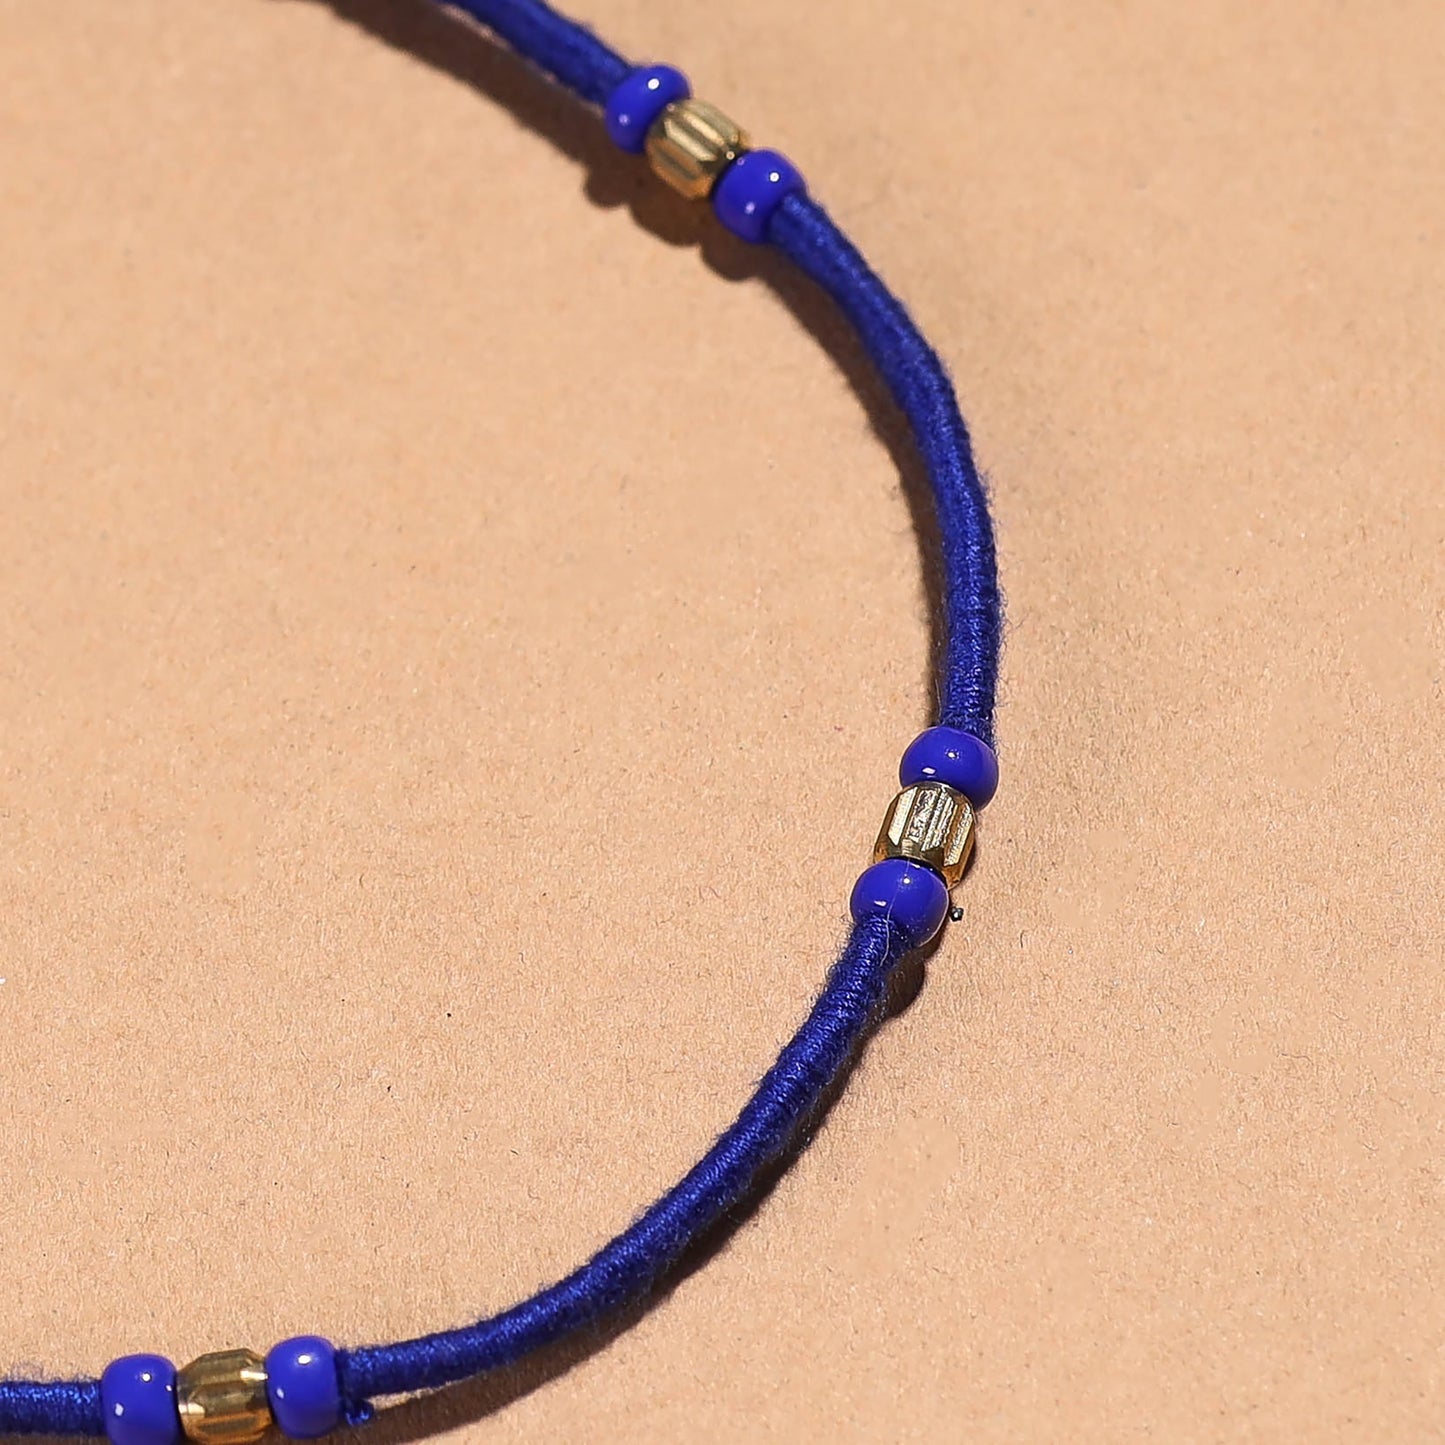 Handcrafted Patwa Thread & Beadwork Anklet